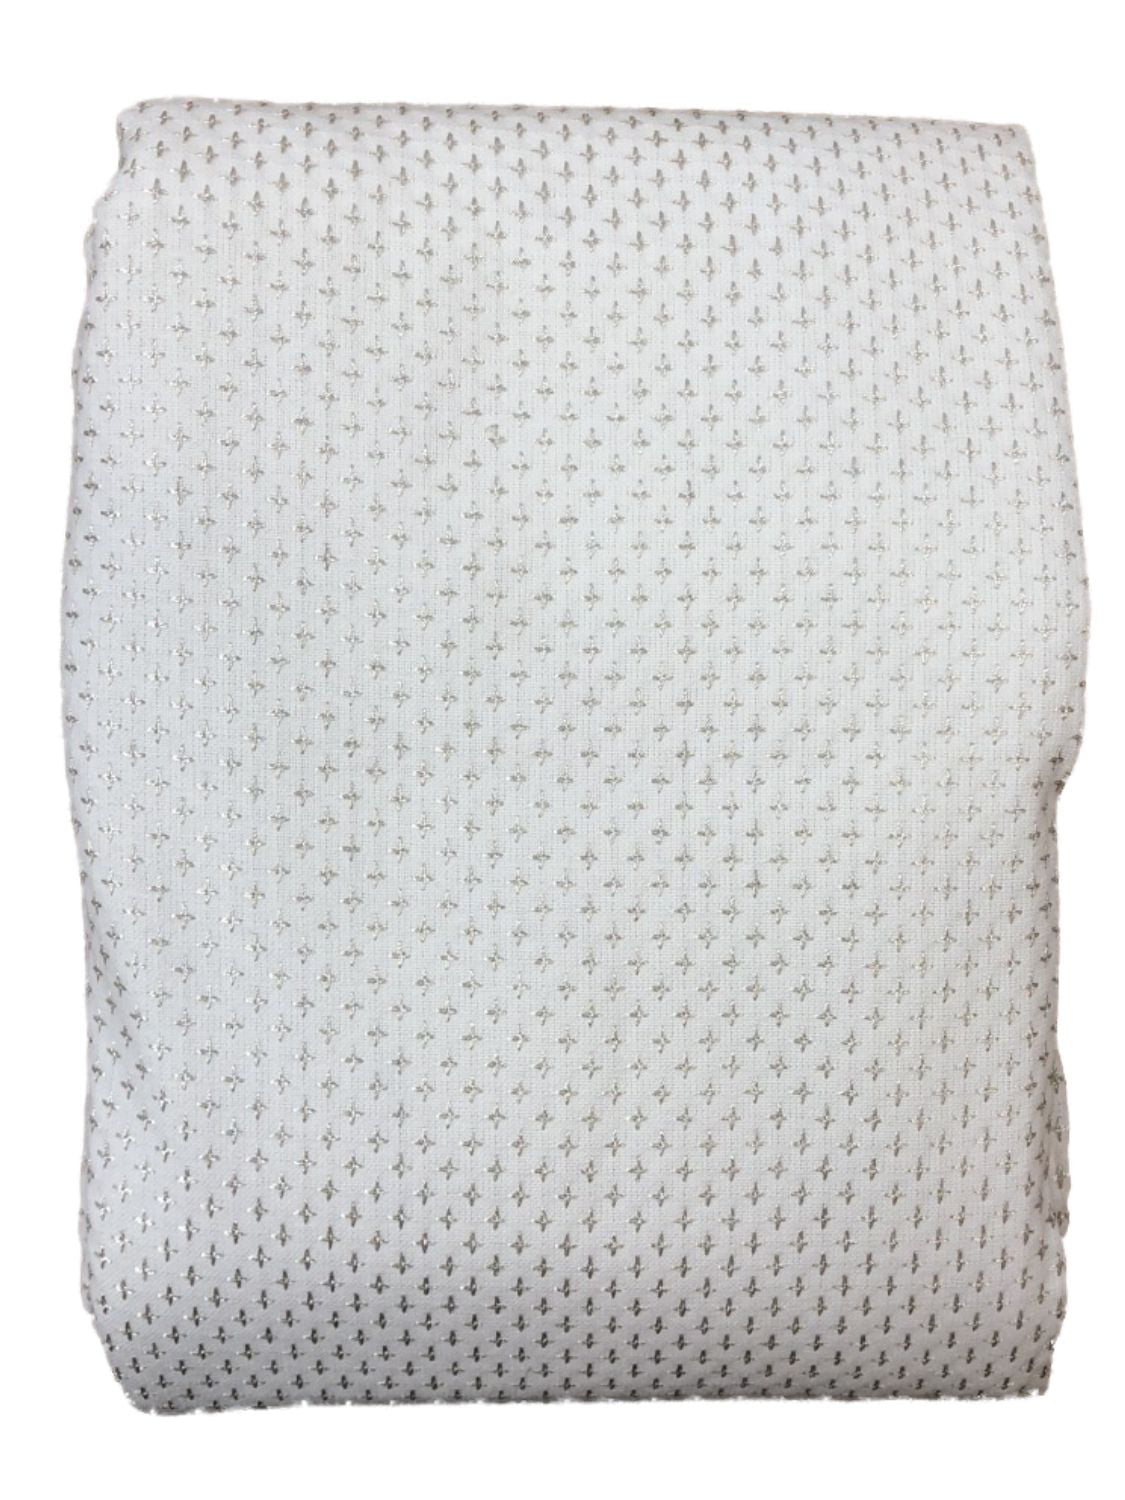 Holiday Ivory Tablecloth With Metallic, 70 Round Silver Tablecloth